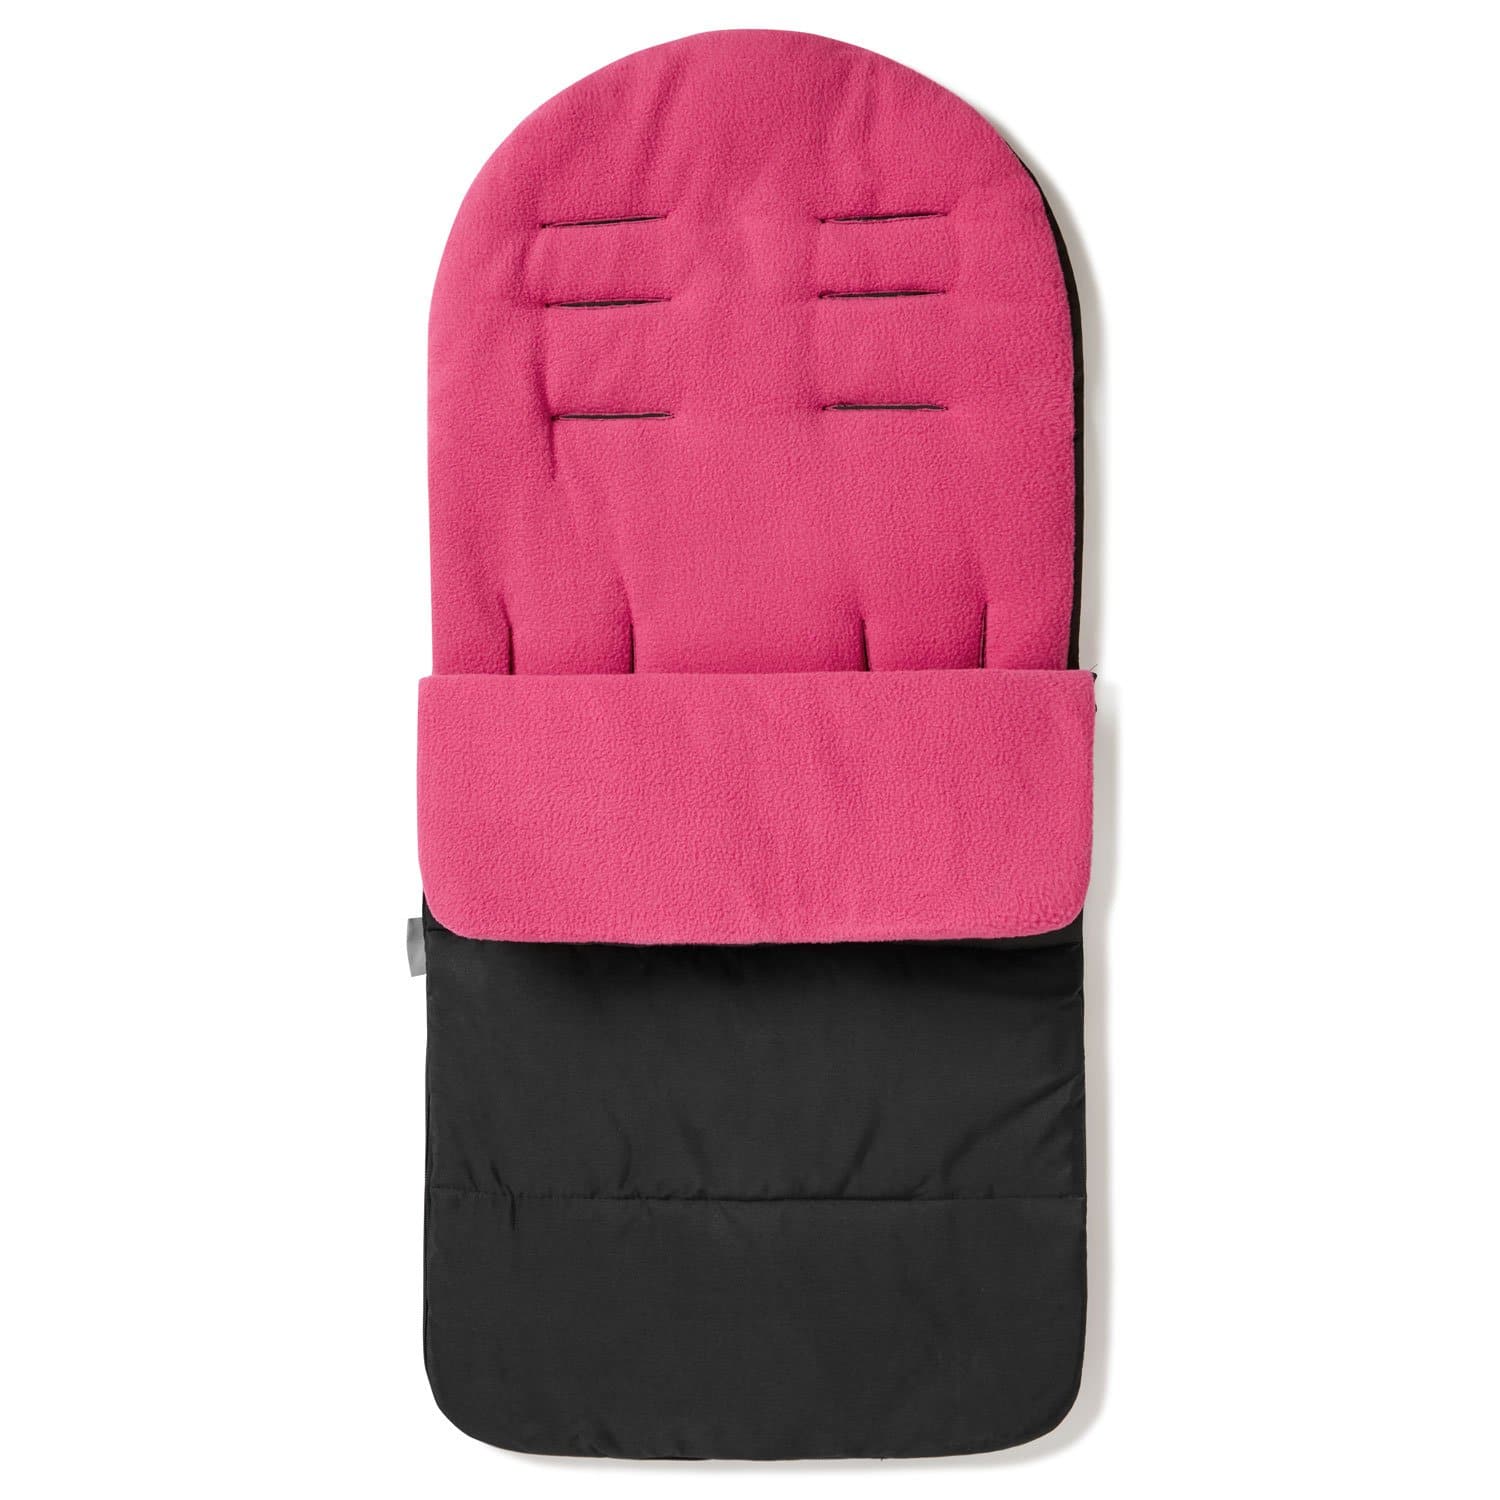 Premium Footmuff / Cosy Toes Compatible with ABC Design - Pink Rose / Fits All Models | For Your Little One